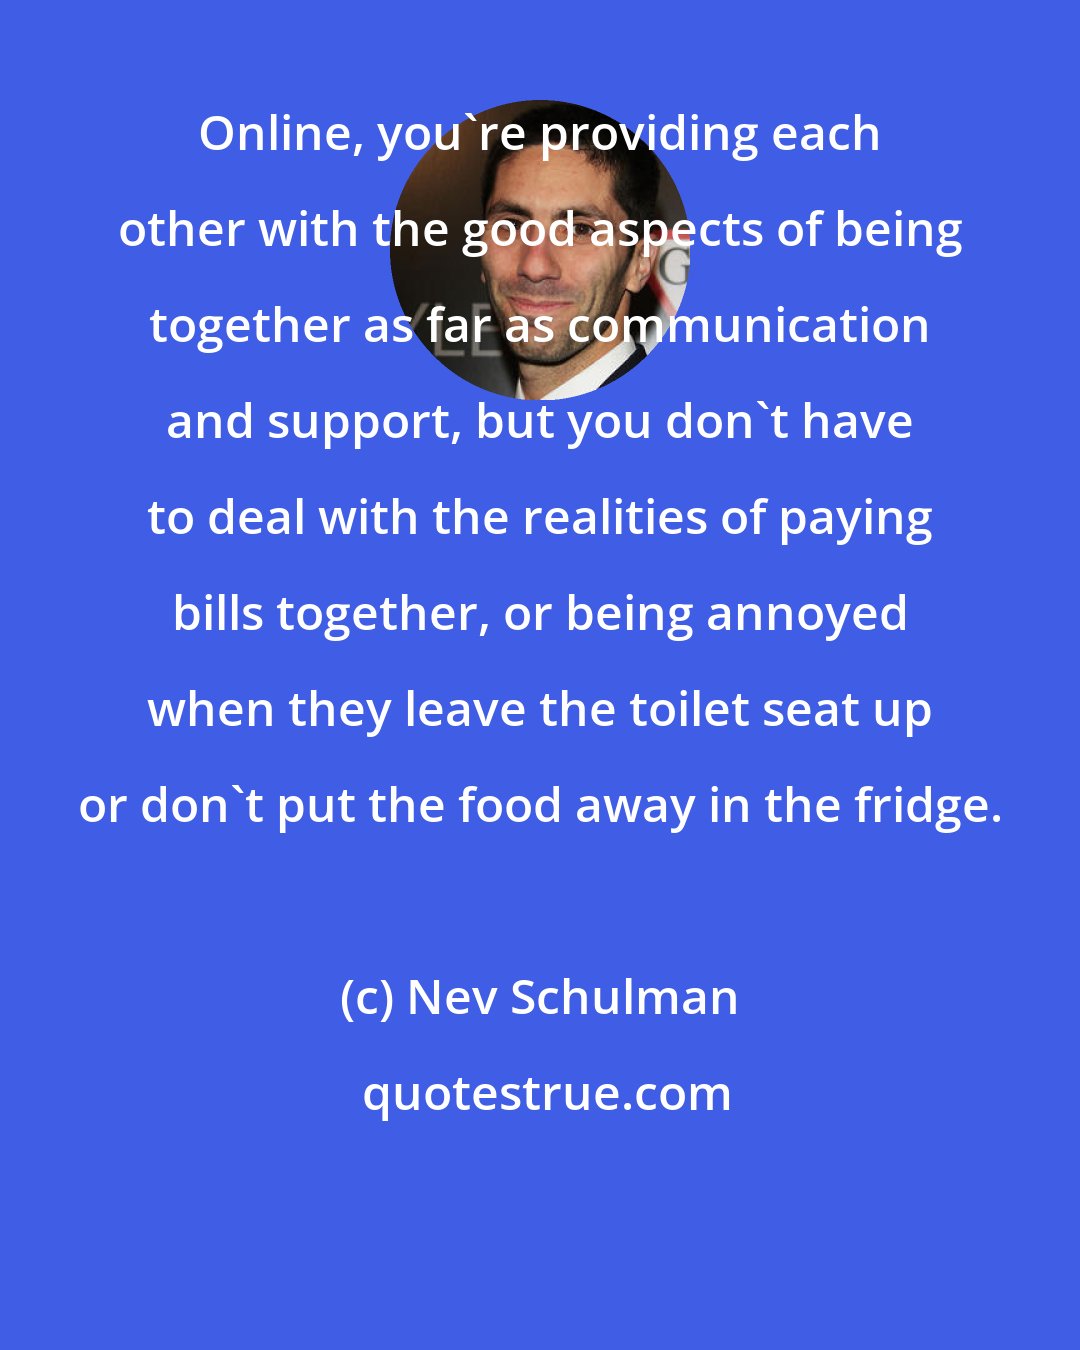 Nev Schulman: Online, you're providing each other with the good aspects of being together as far as communication and support, but you don't have to deal with the realities of paying bills together, or being annoyed when they leave the toilet seat up or don't put the food away in the fridge.